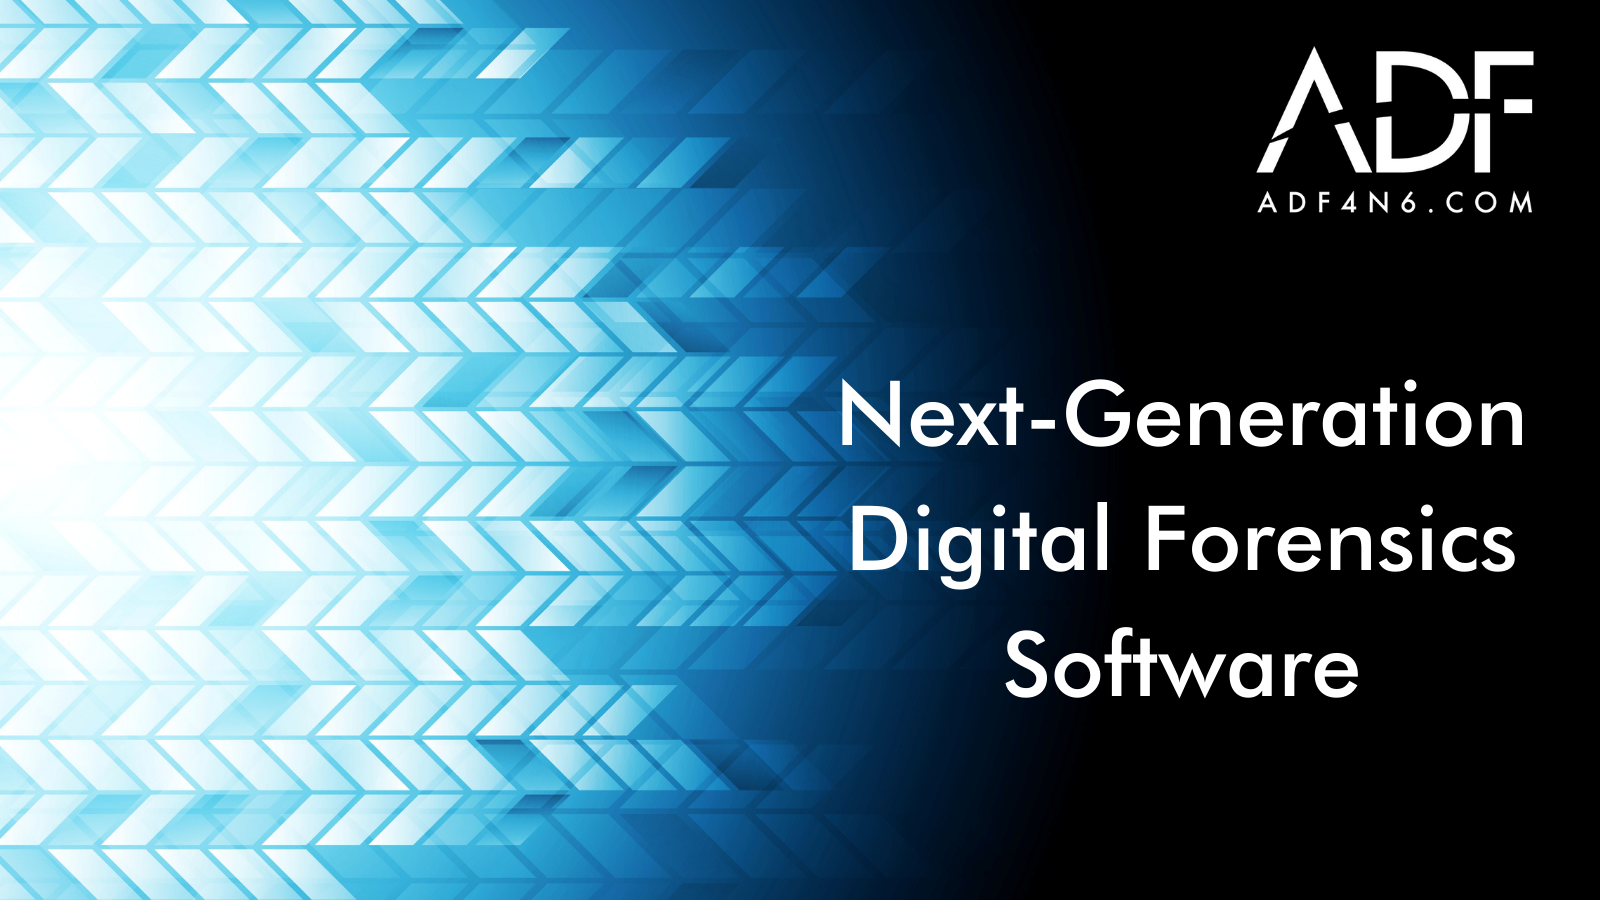 Next-Generation Digital Forensics Software: 5 Areas That You Want Your Department To Be Ahead In